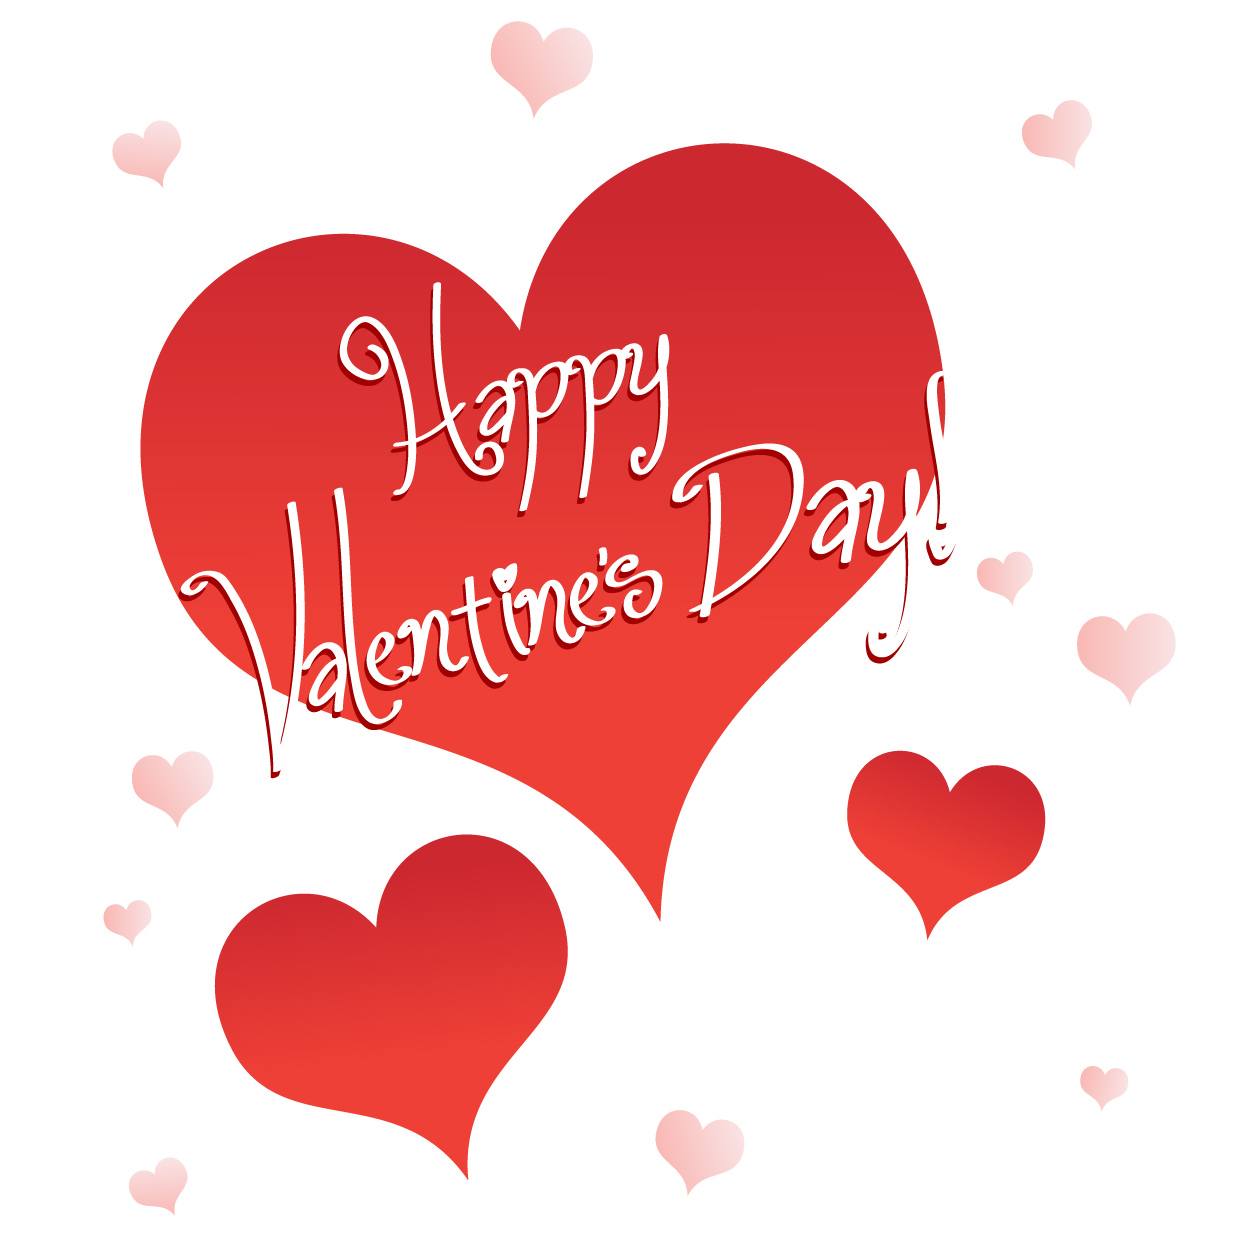 Happy Valentine's Day! — Vector illustration of hearts with the ...